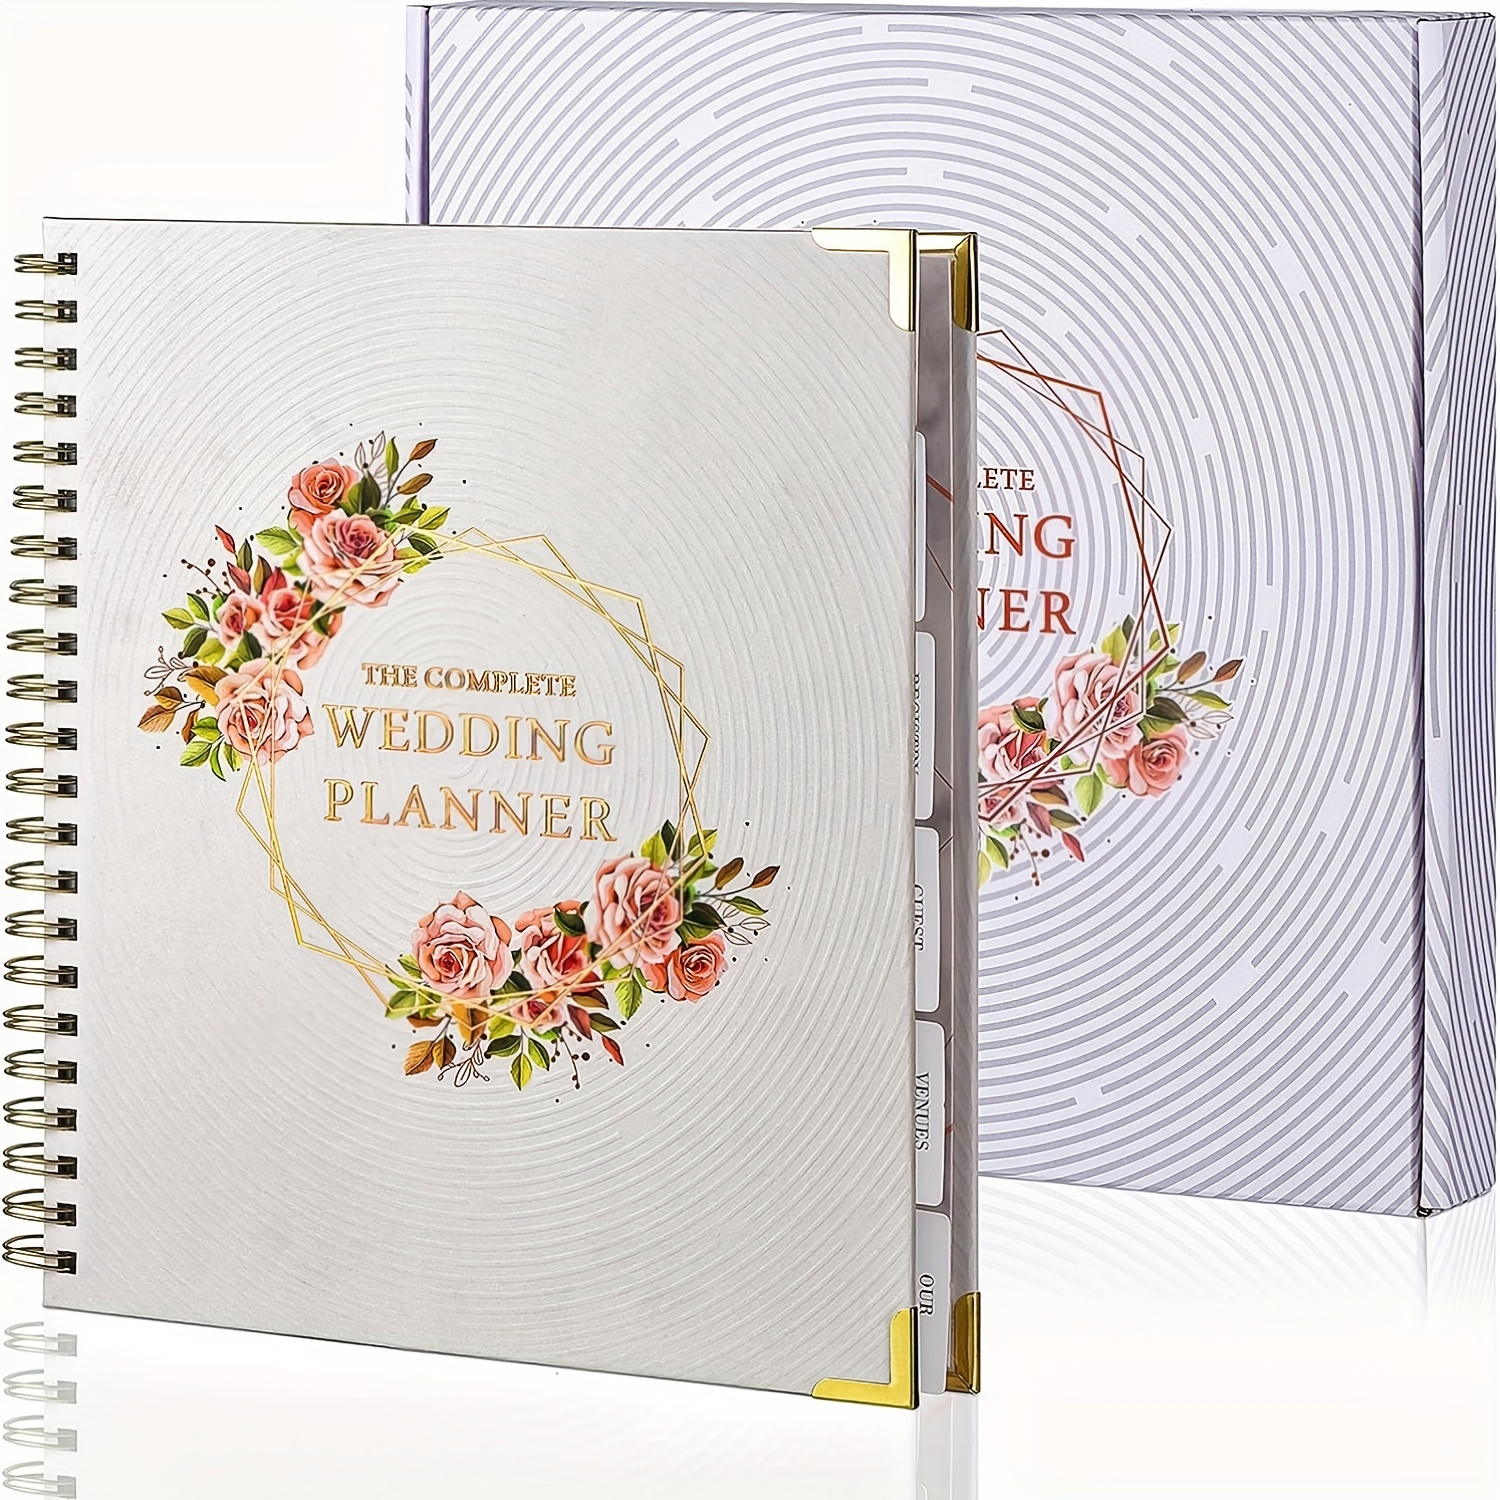 Wedding Planner and Organizer for The Bride-Wedding Planning Book,188 Pages,Golden Foil Hardcover with Metal Corner + 6 Inner Pockets+ Countdown